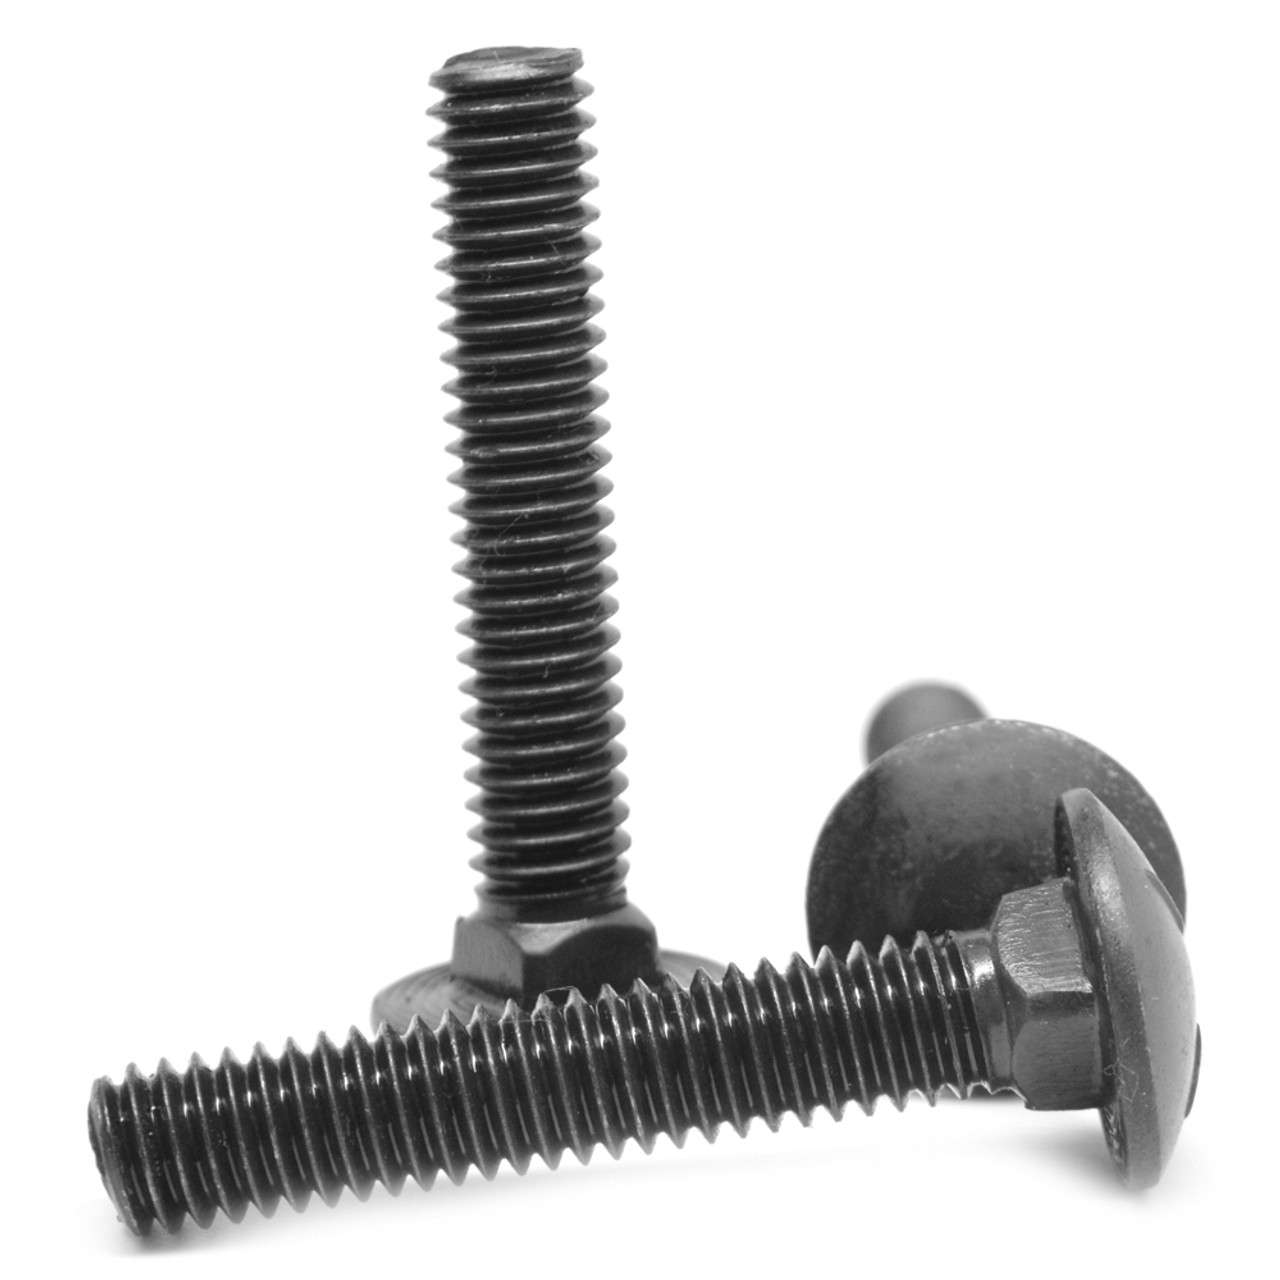 #8-32 x 1" (FT) Coarse Thread Carriage Bolt Low Carbon Steel Black Oxide